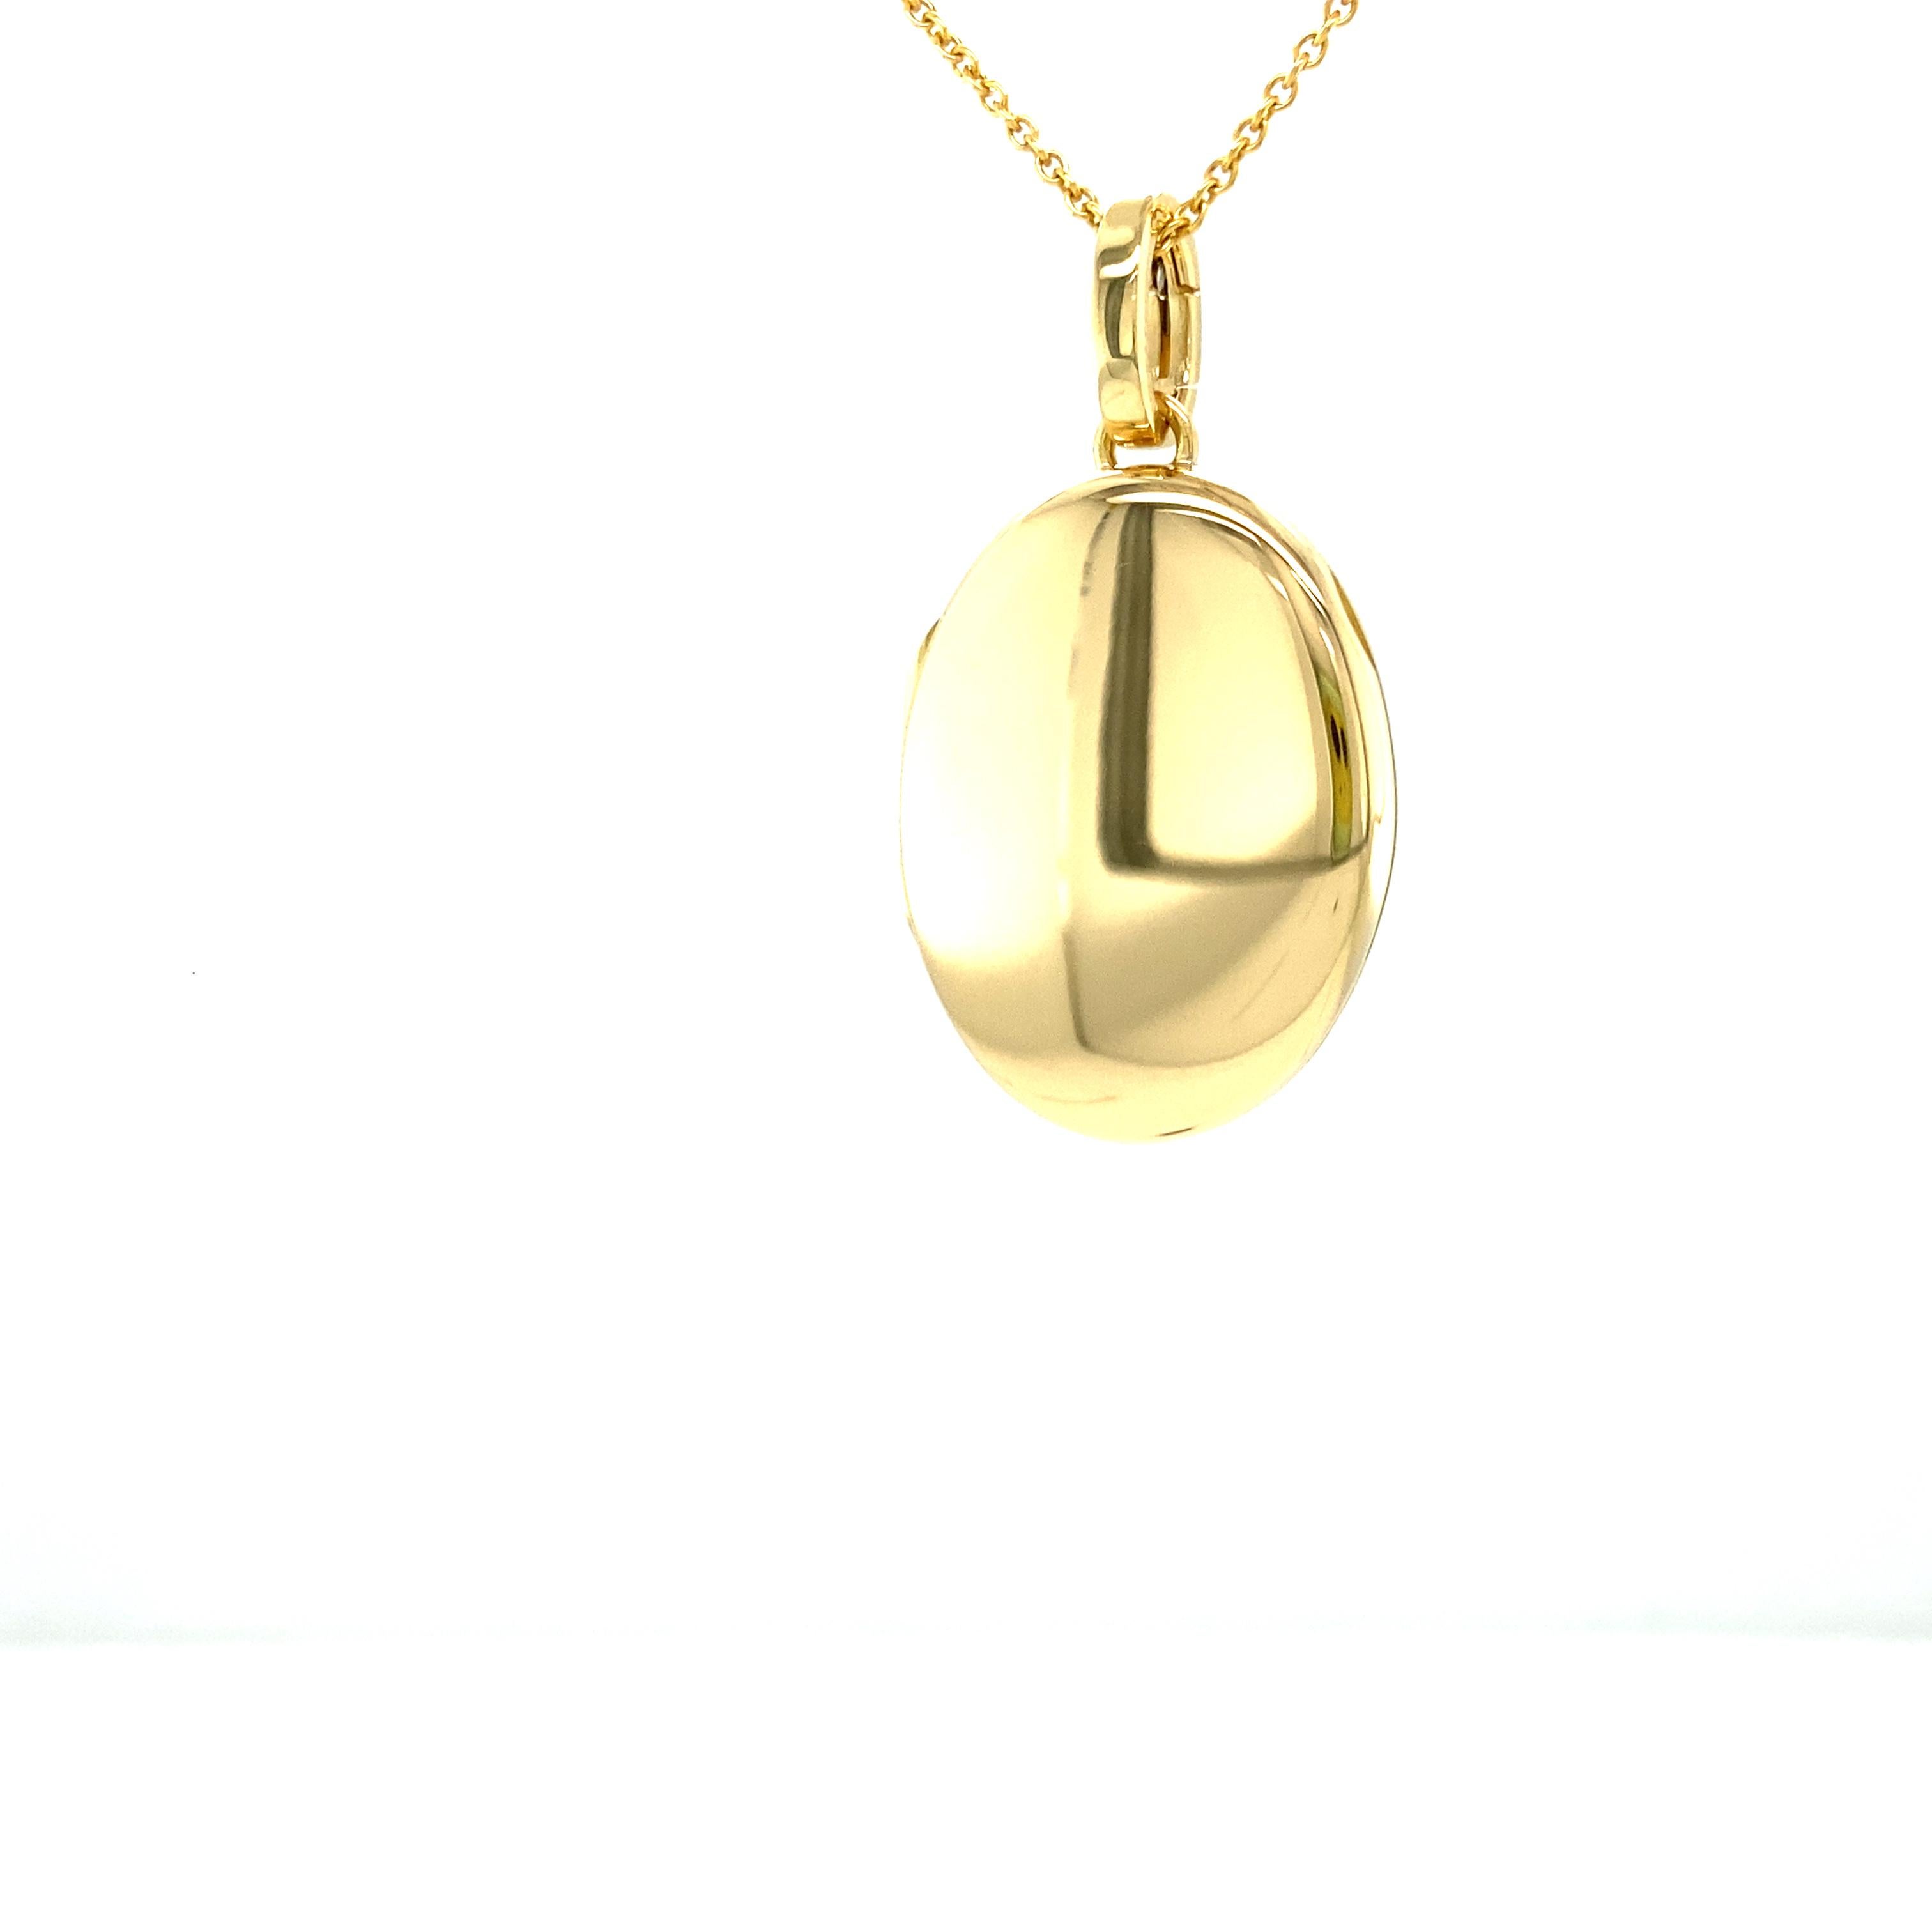 Victor Mayer customizable polished oval locket pendant necklace 18k yellow gold, Hallmark collection, measurements app. 20.0 mm x app. 27.0 mm

About the creator Victor Mayer
Victor Mayer is internationally renowned for elegant timeless designs and